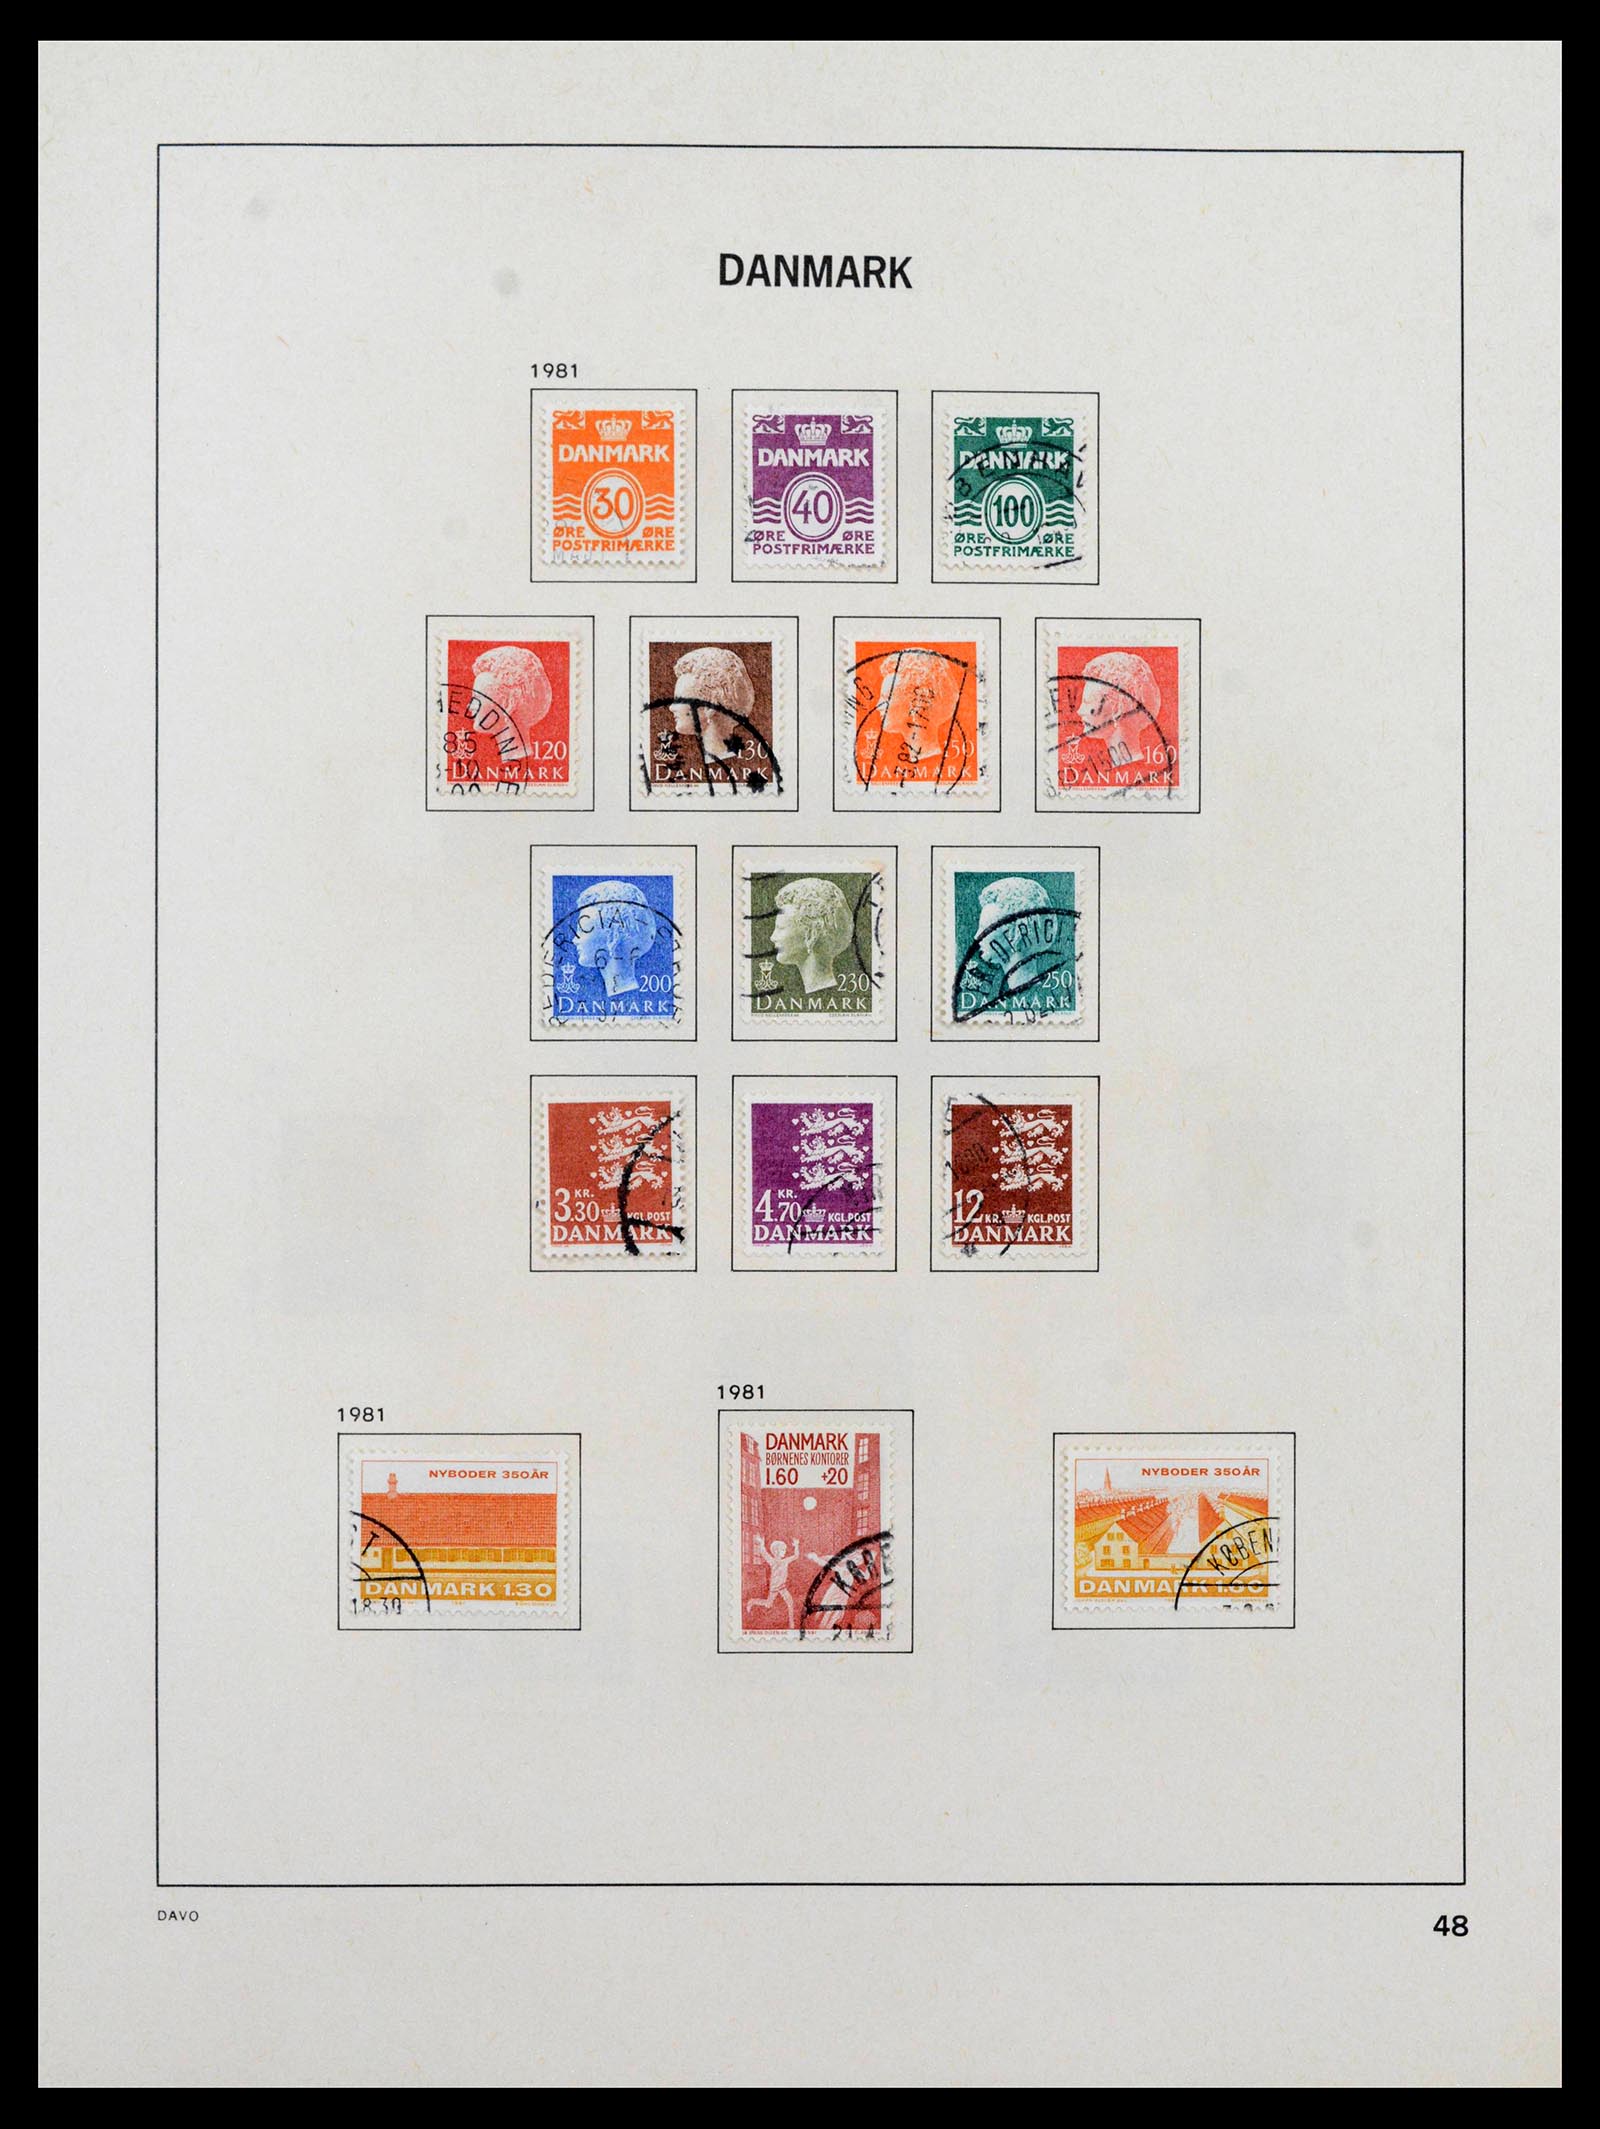 39428 0050 - Stamp collection 39428 Denmark 1851-2019.